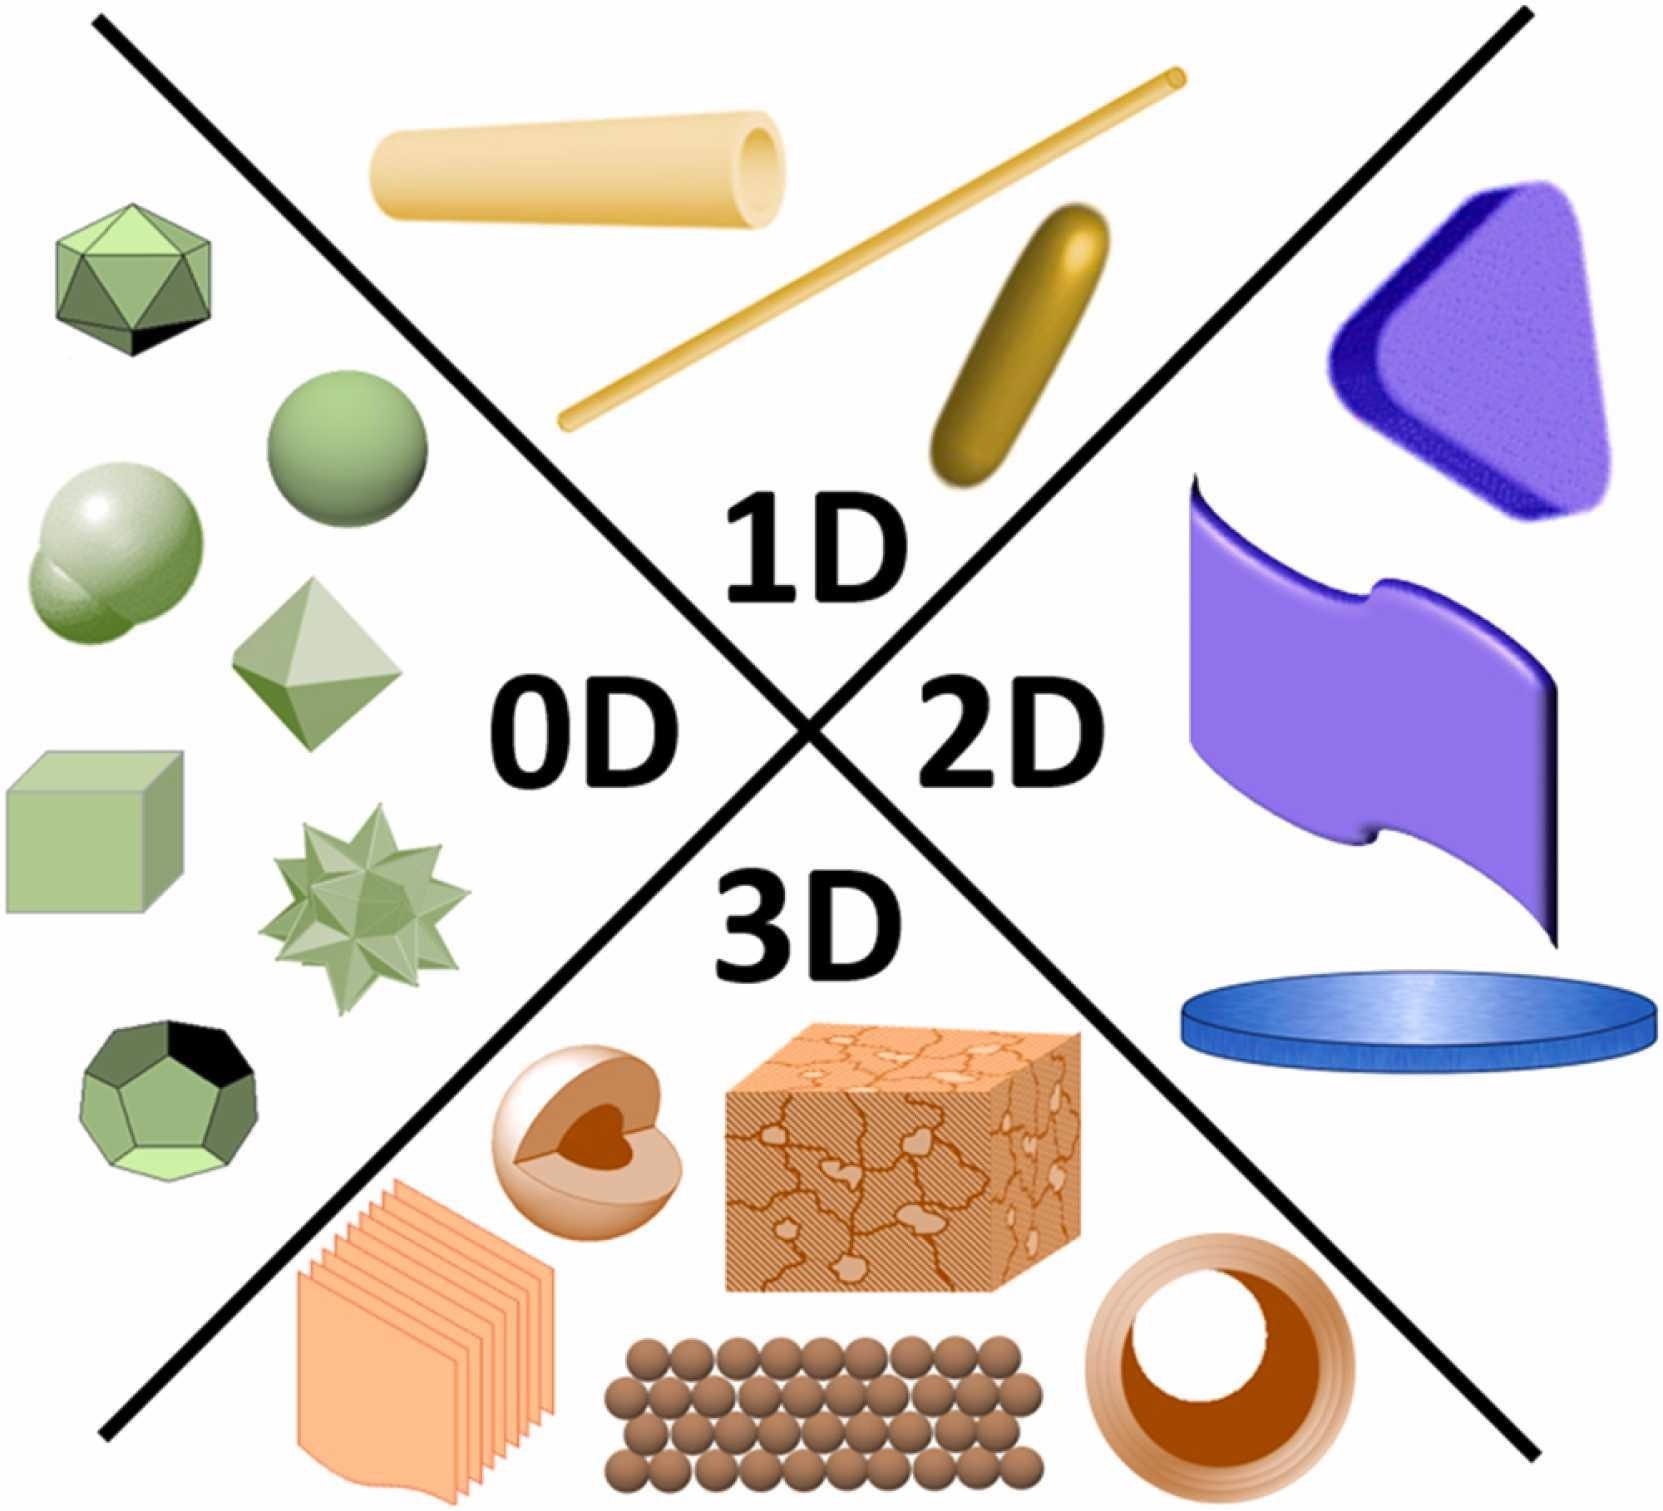 Schematic representation of different morphologies of nanomaterials. Based on their morphology, nanomaterials are classified into 0D, 1D, 2D, and 3D nanostructures. 0D nanomaterials have all dimensions in the nanoscale. 1D and 2D nanomaterials have one and two dimensions, respectively, beyond the nanoscale. 3D nanomaterials are microstructures with nanofeatures, such as hollow microstructures with nanoshells and nanoparticle-based micro assemblies.